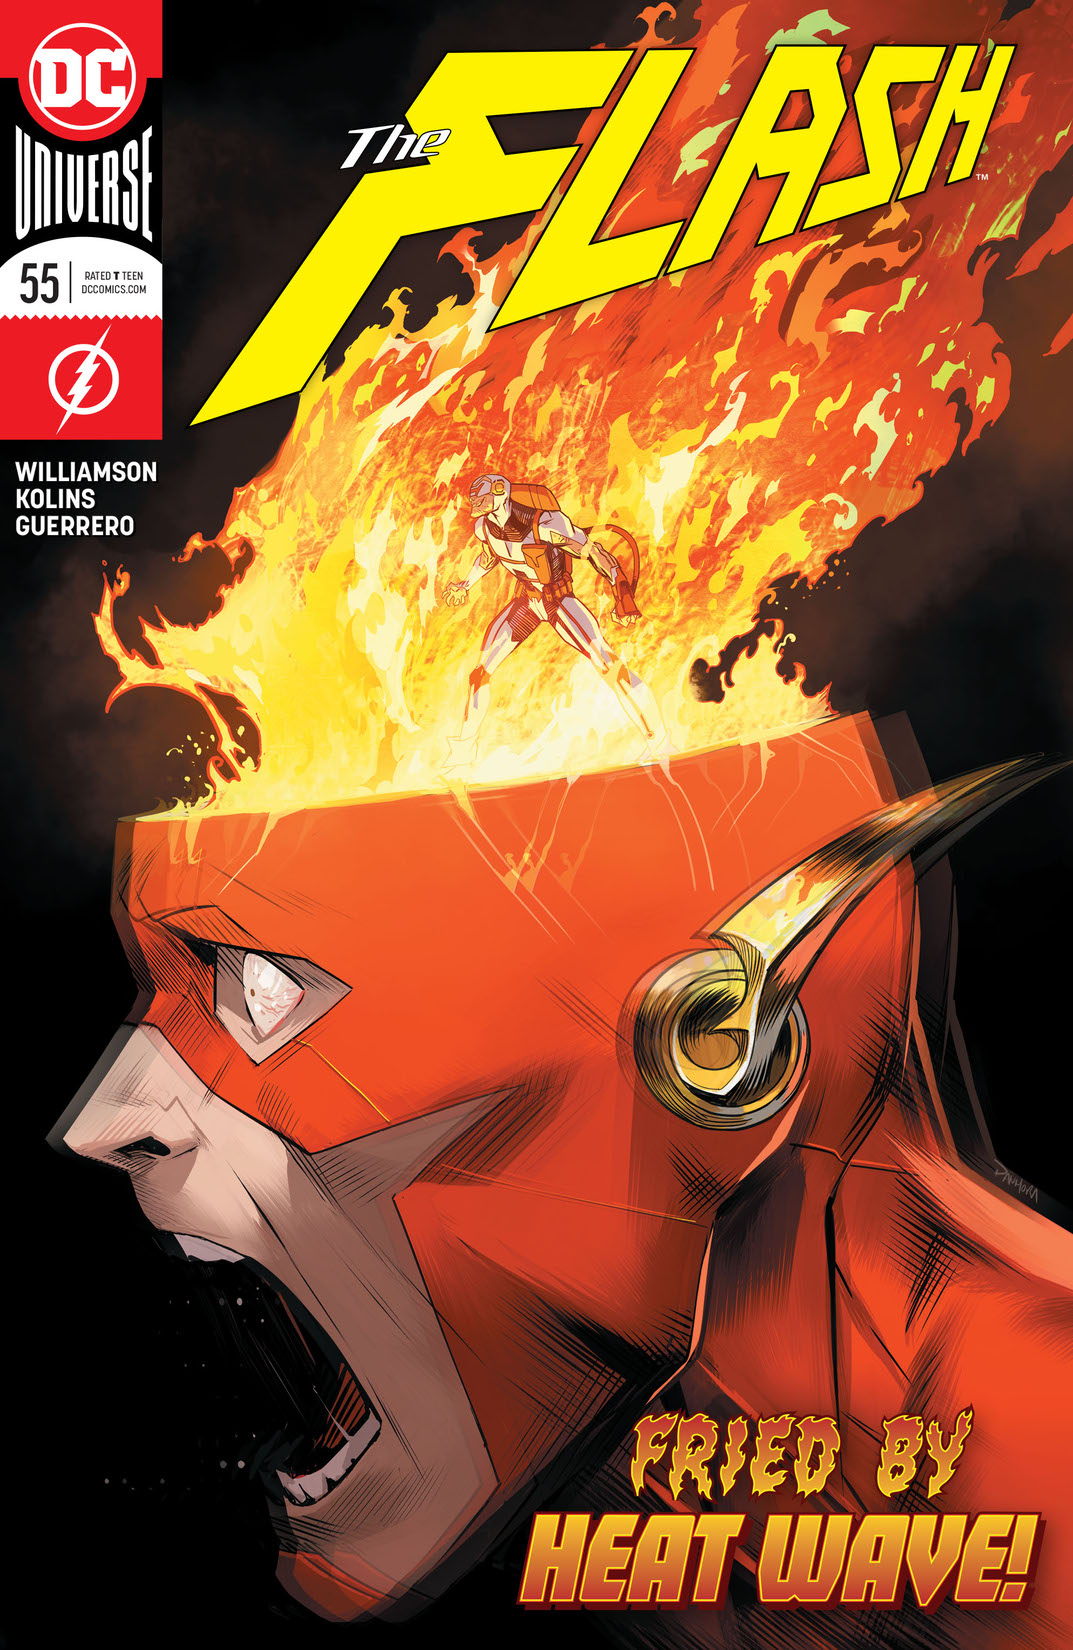 The Flash (2016-) #55 preview images